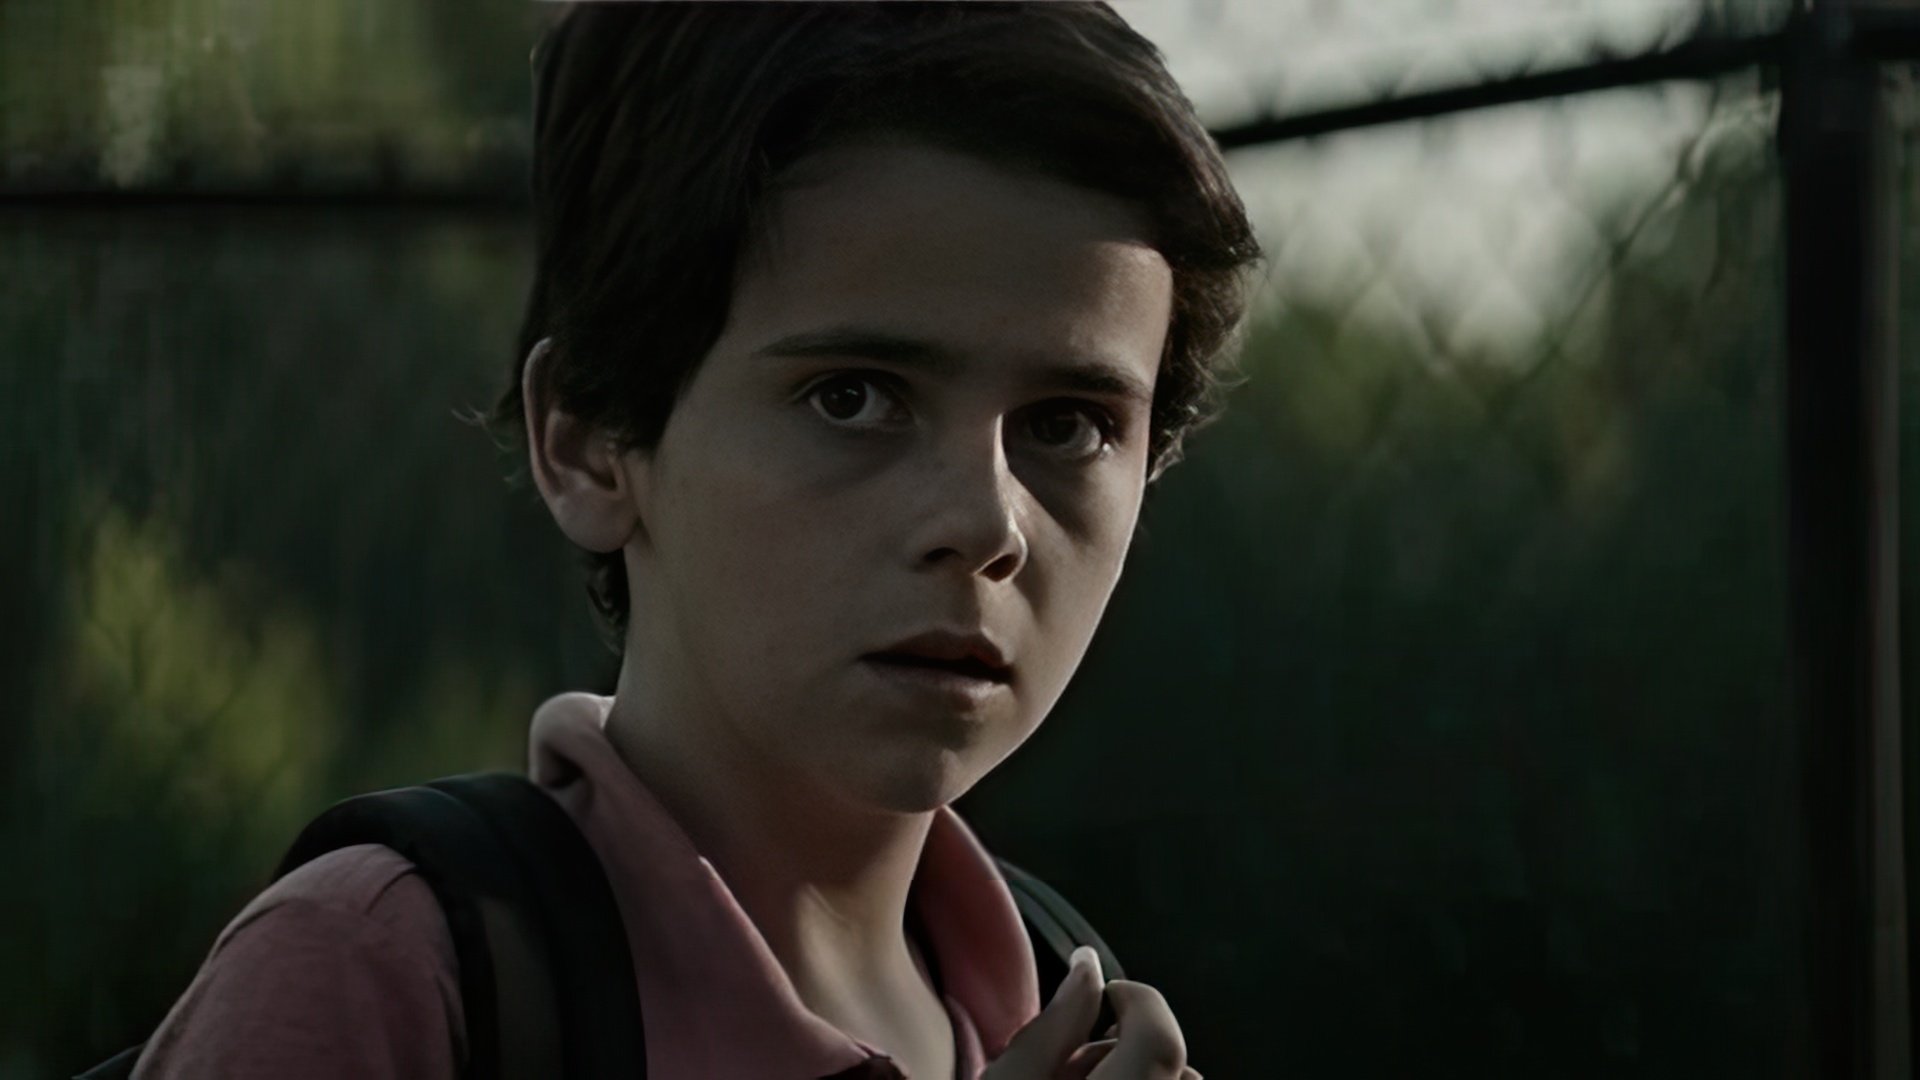 A Young Actor, Jack Grazer